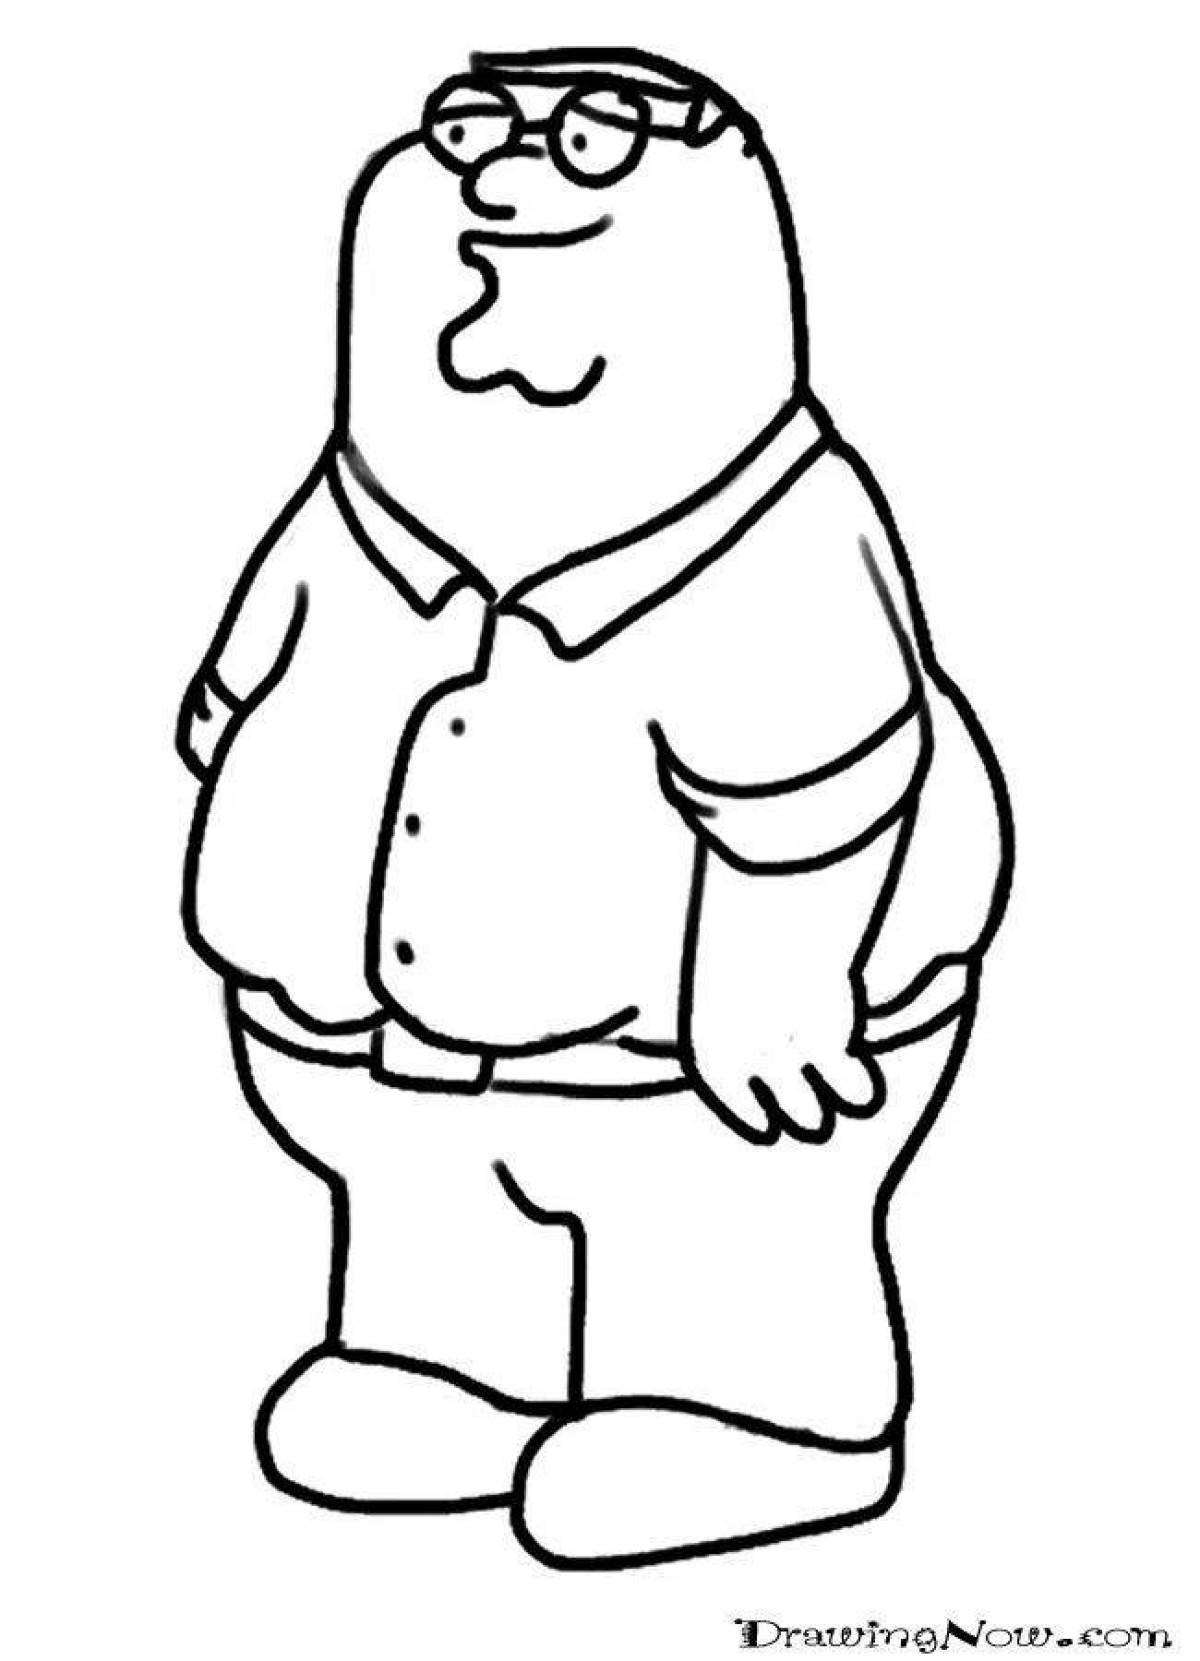 Great peter griffin coloring book